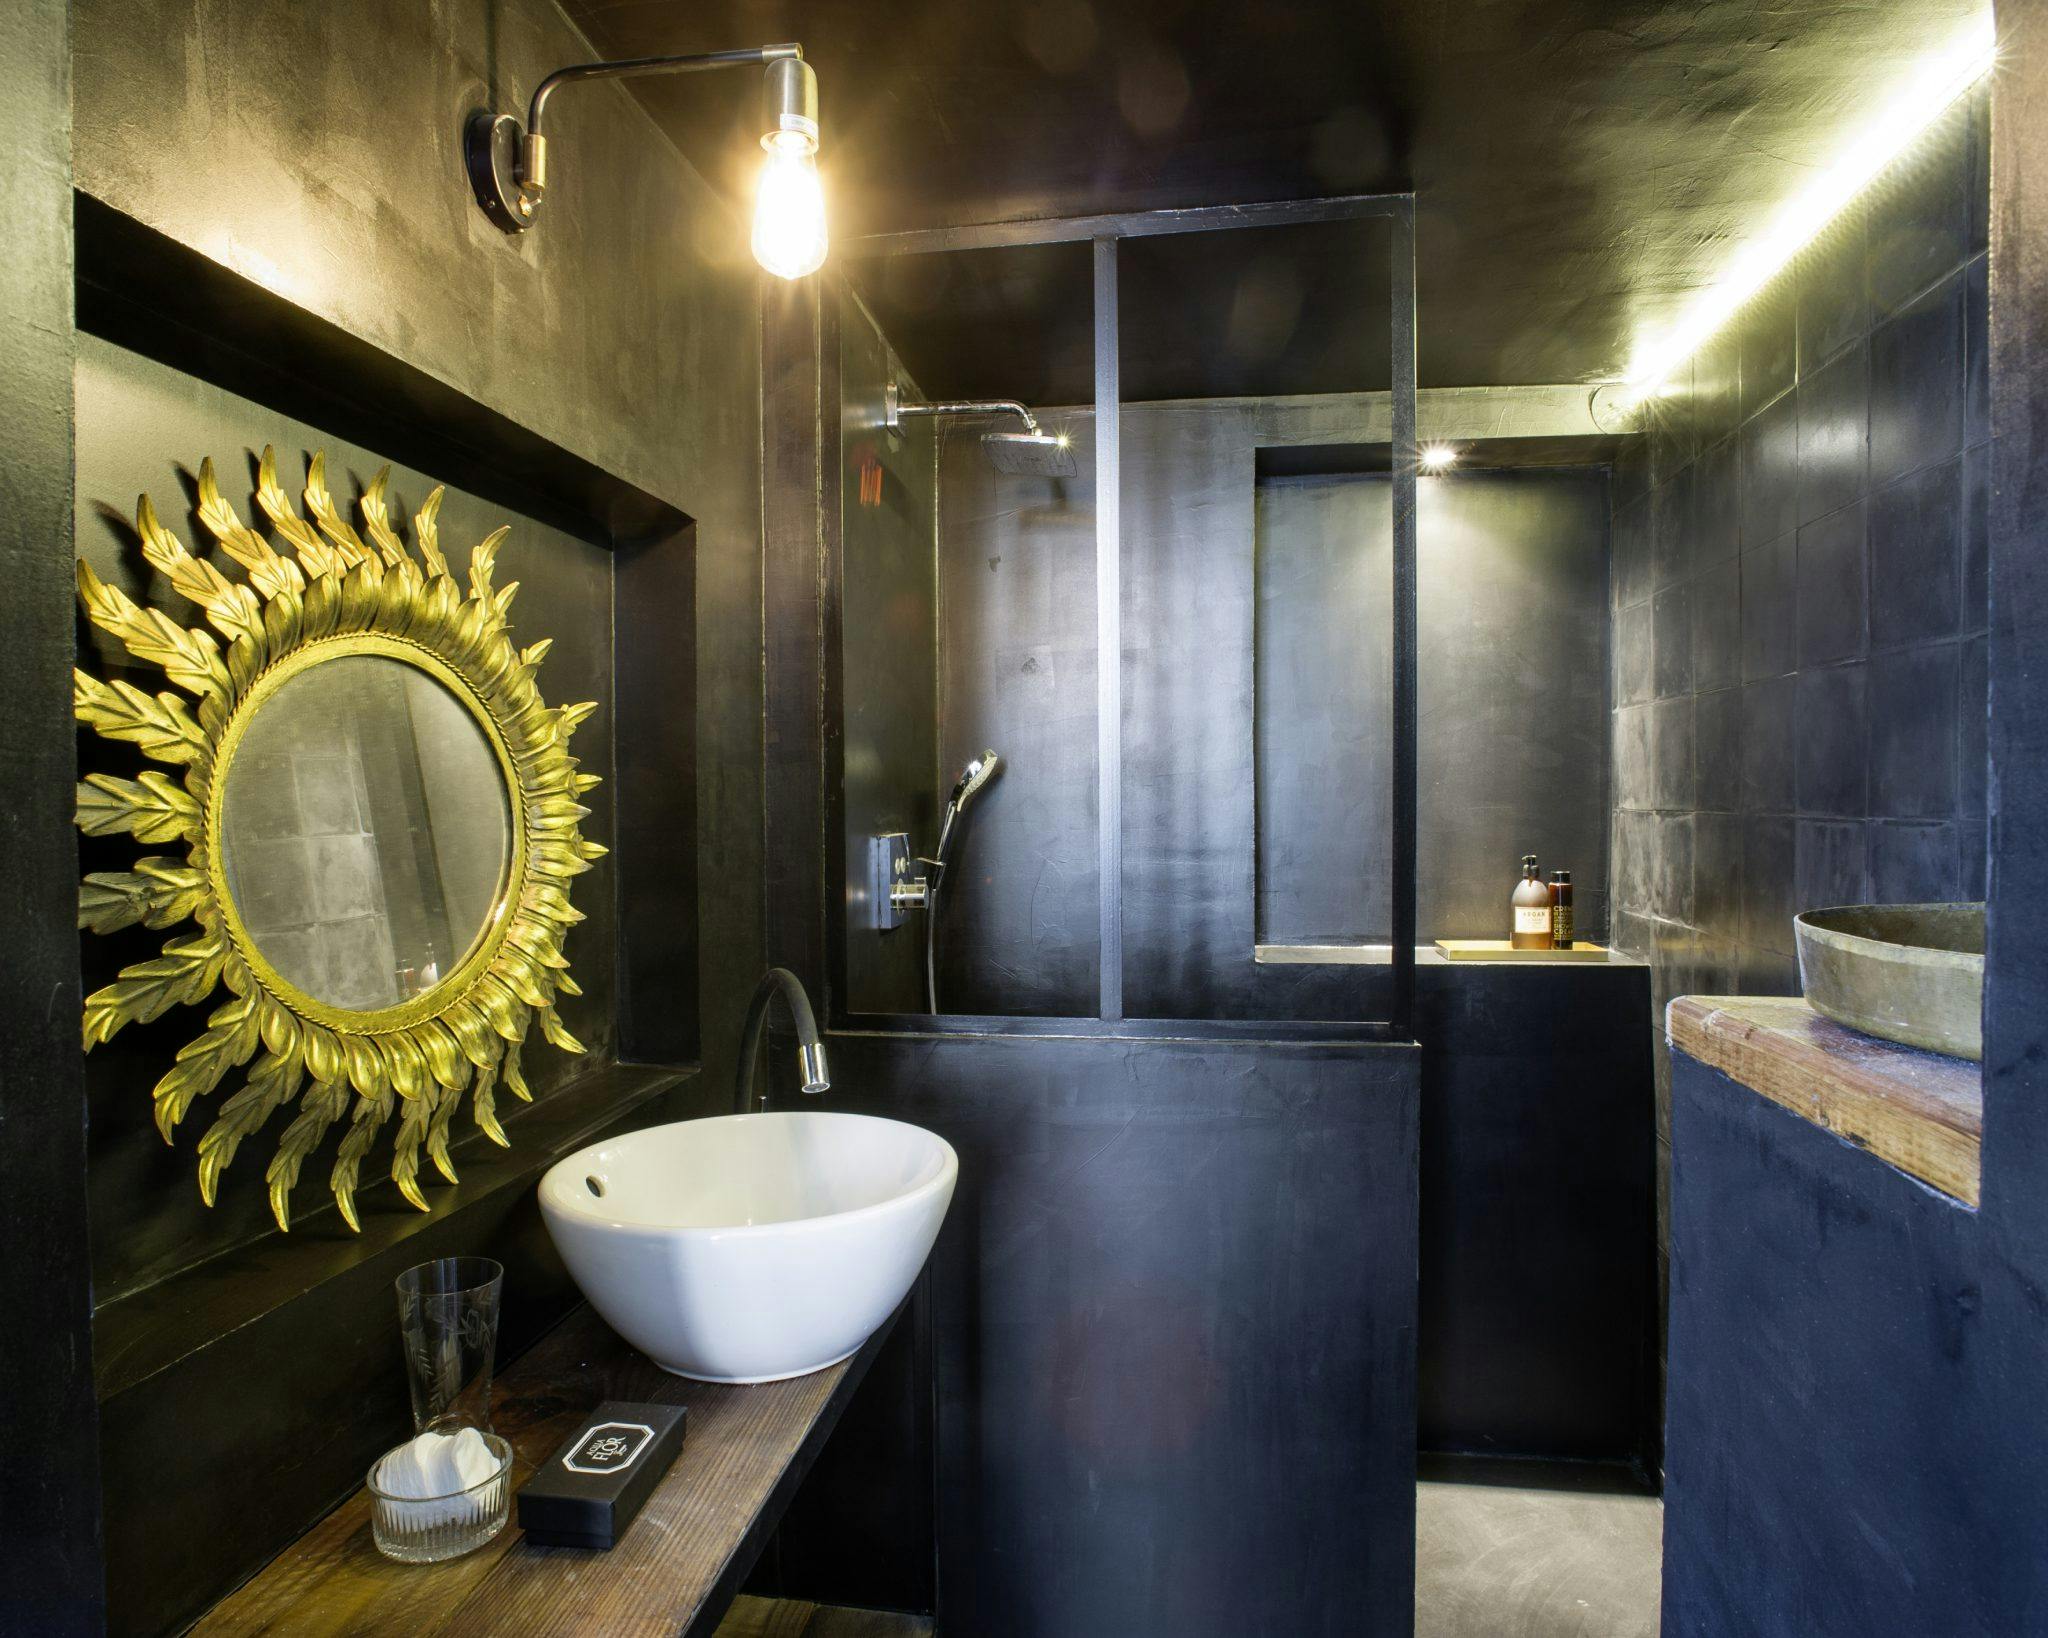 Detail of the bathroom with black walls, glass bay window, and golden mirror.